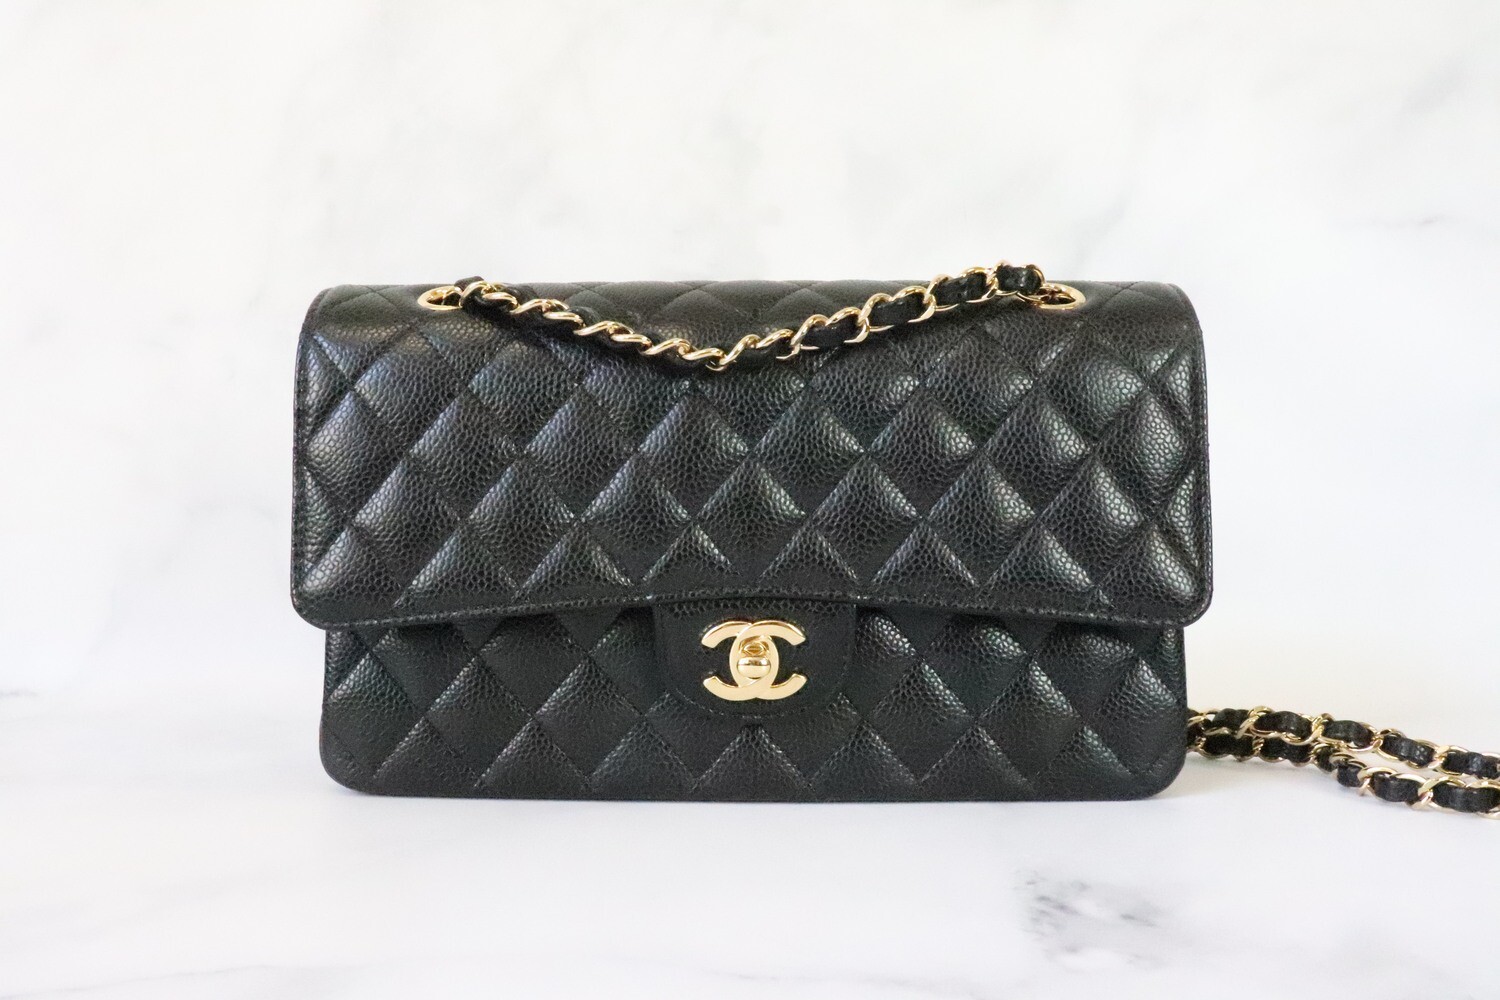 Chanel Classic Medium Double Flap, Black Caviar Leather, Gold Hardware, New  in Box